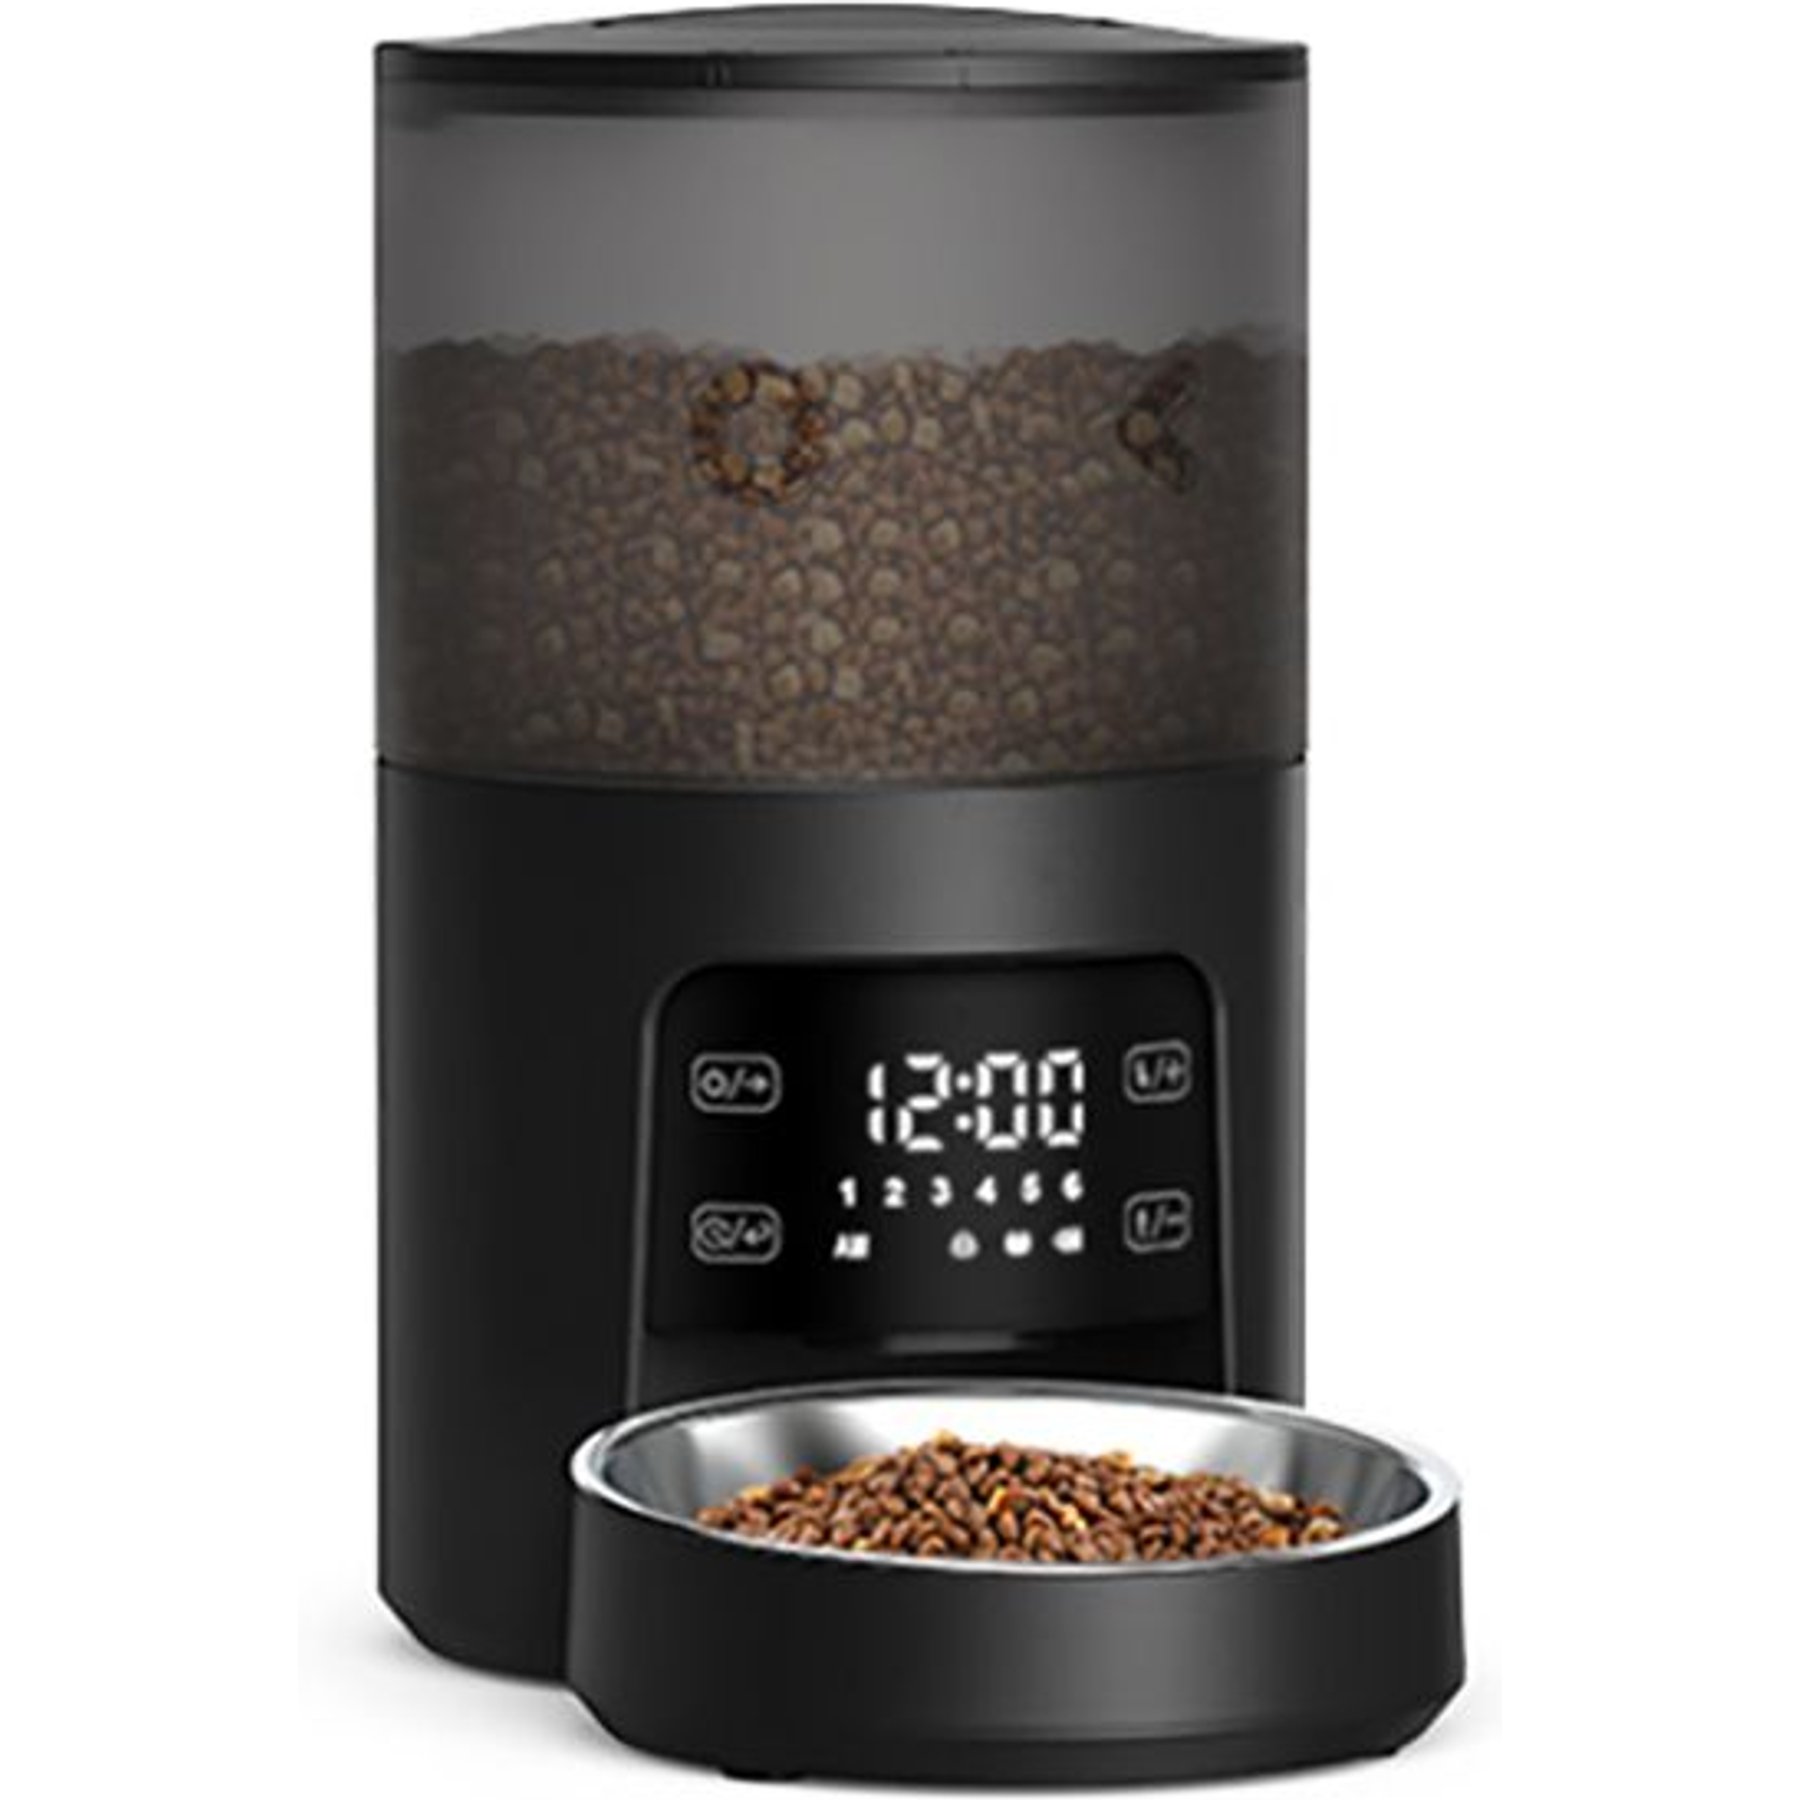 PetSafe Six Meal Automatic Pet Feeder: A Steady Routine